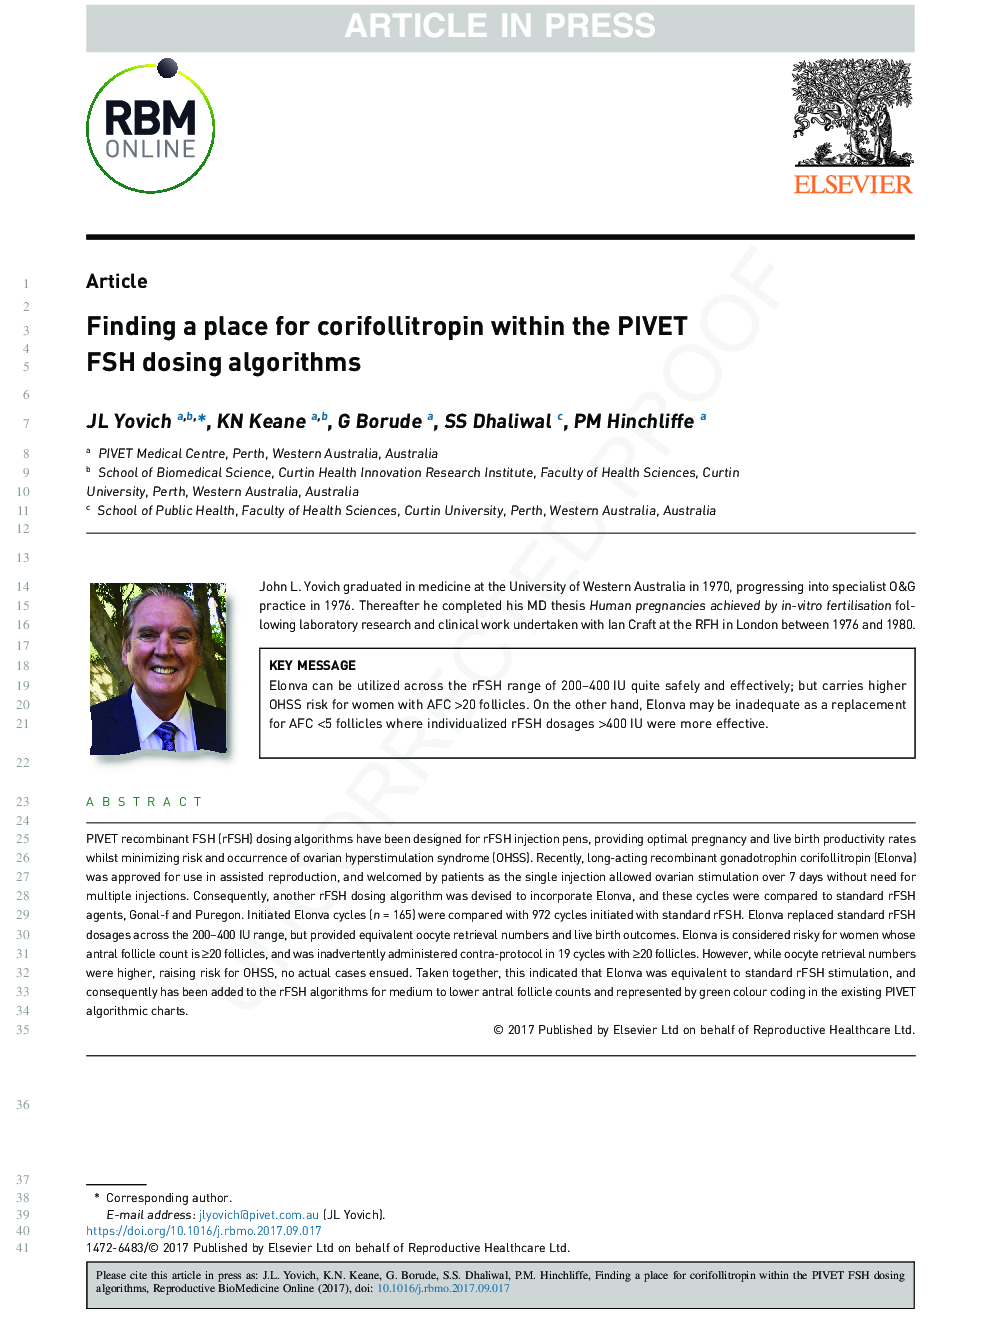 Finding a place for corifollitropin within the PIVET FSH dosing algorithms